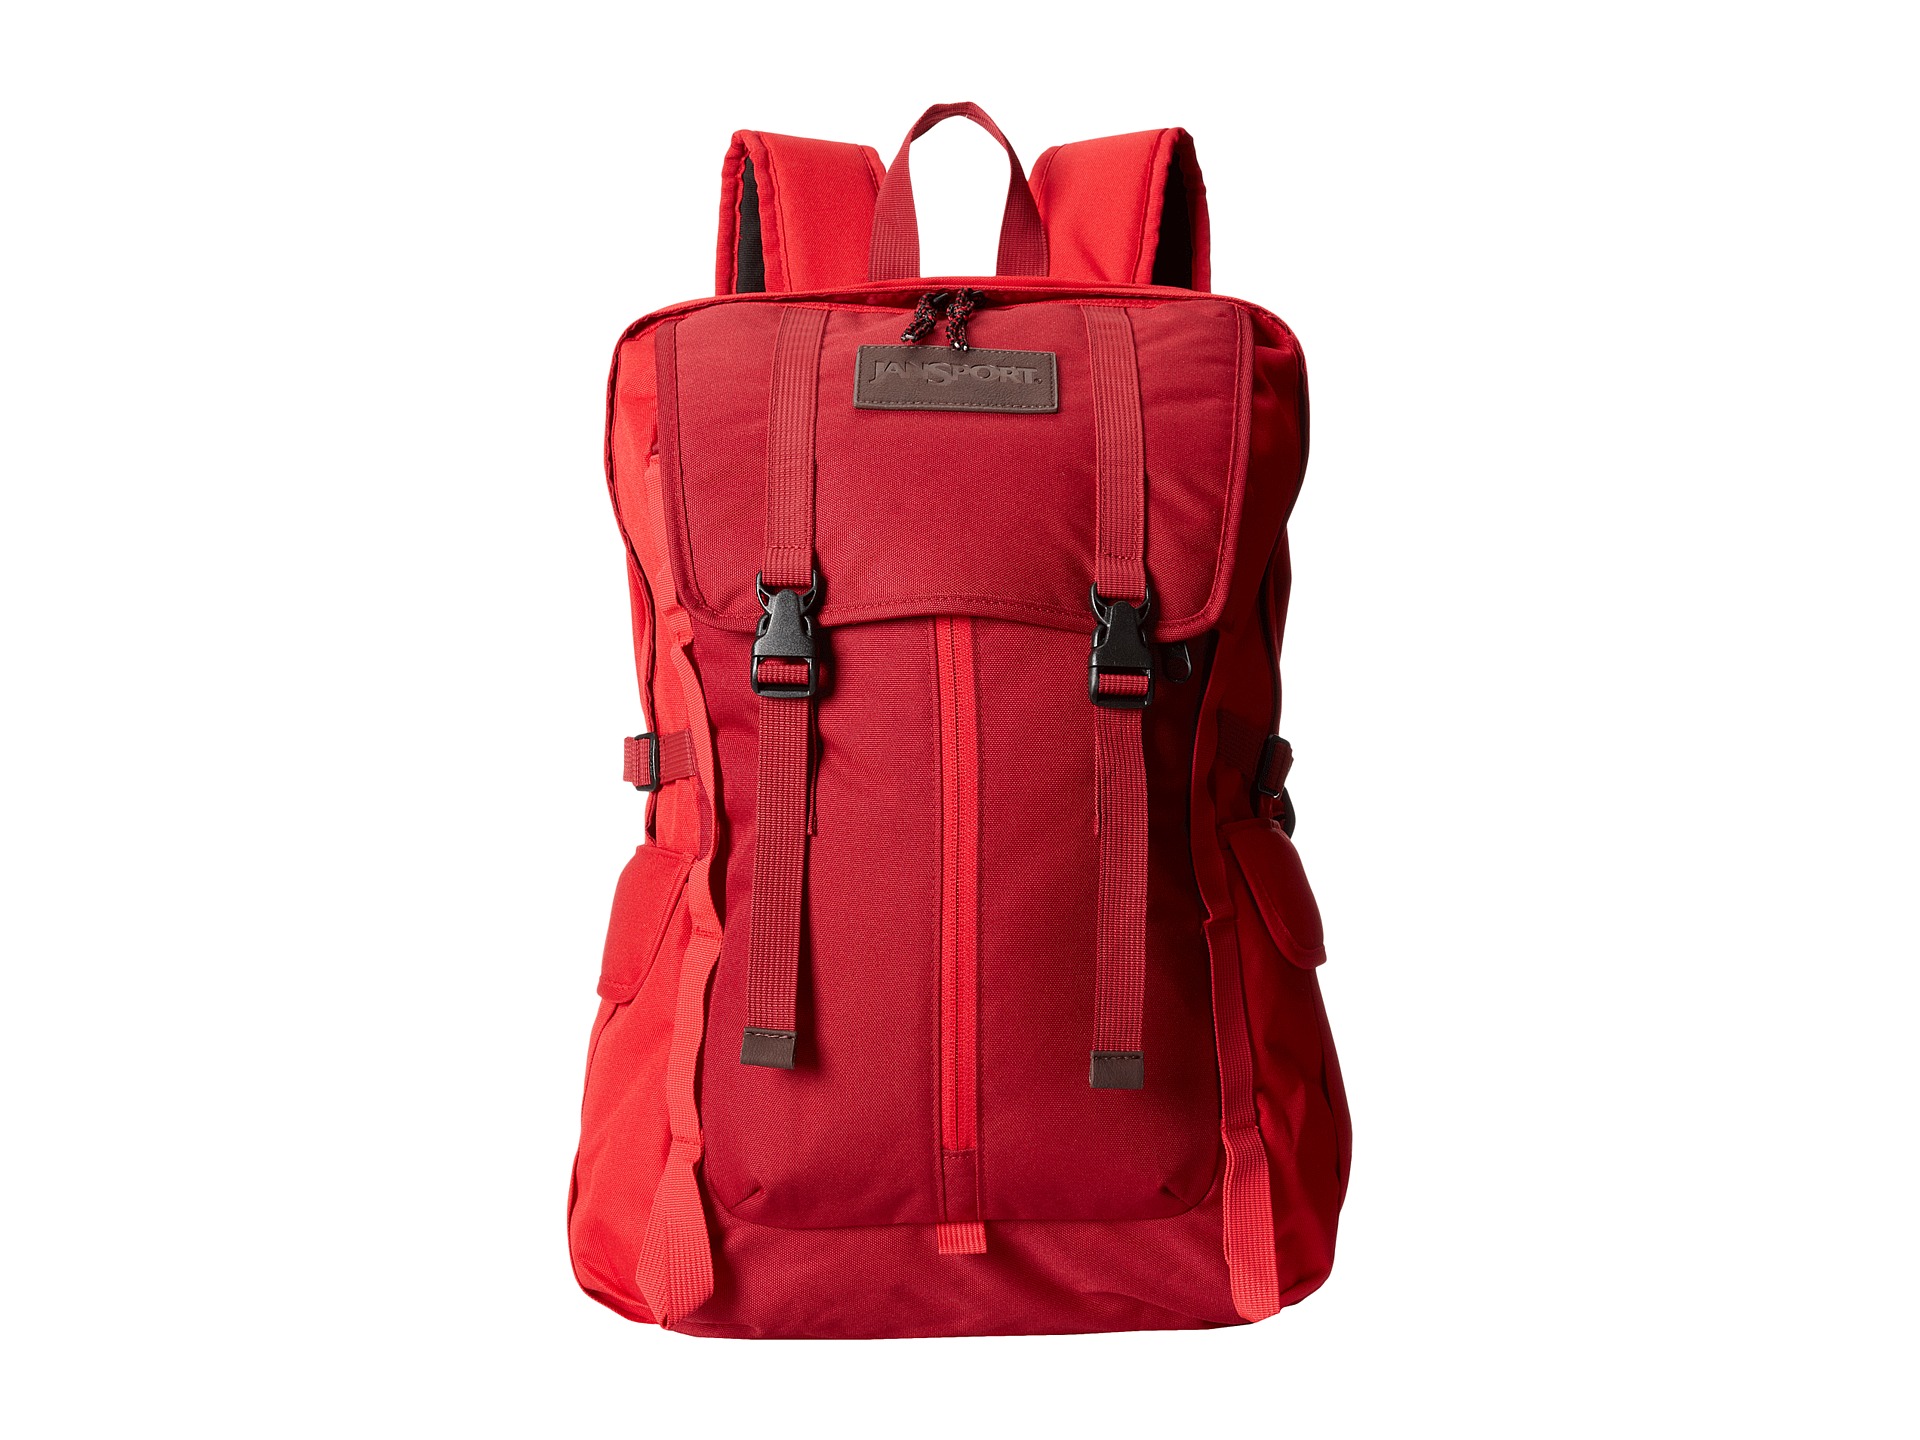 No results for jansport locklyn backpack - Search Zappos